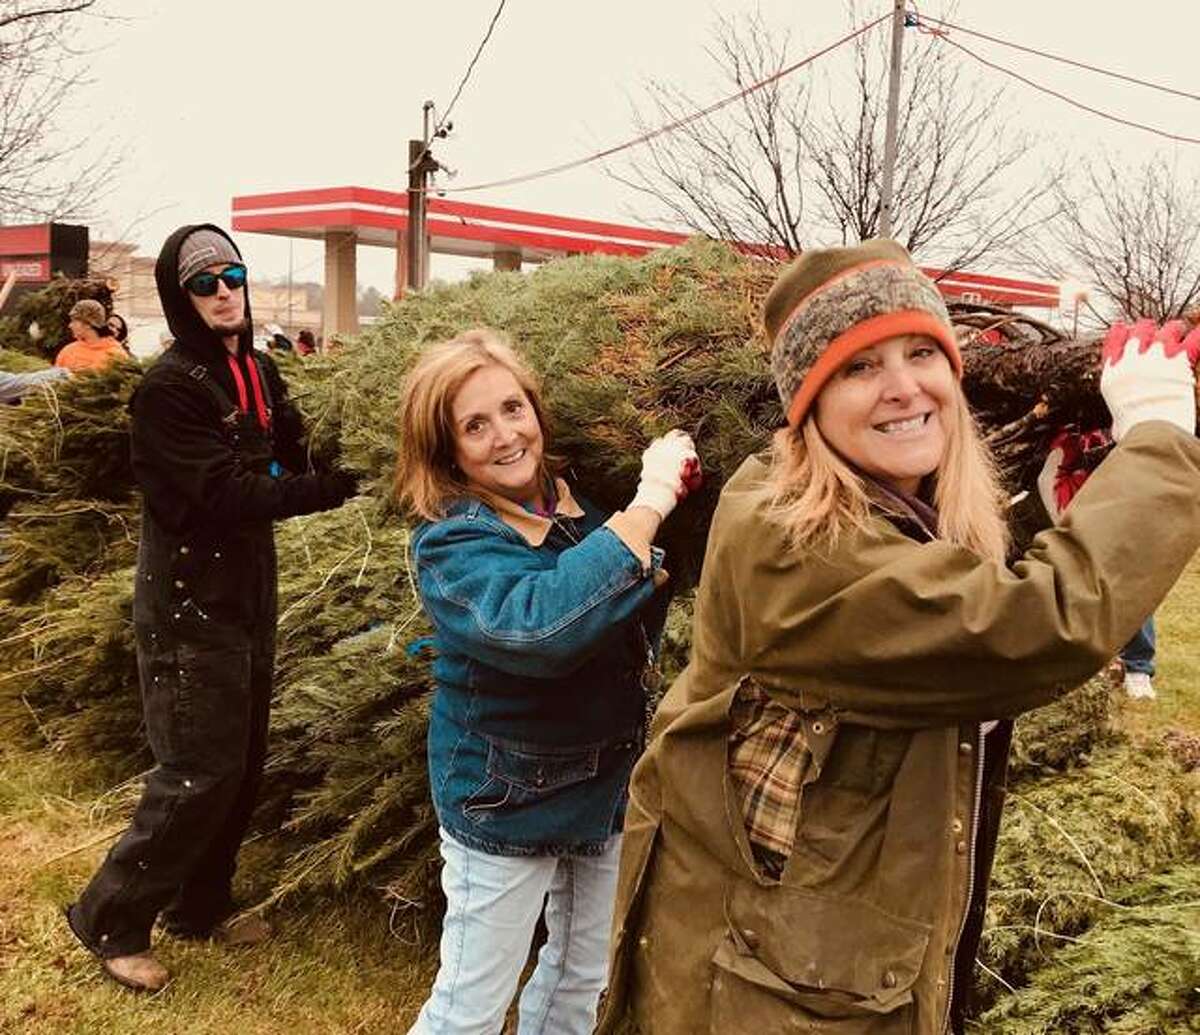 Circuit Judge Kyle Napp, in front, and Ruth Reeves, a therapist with Chestnut Health Systems, help unload a truckload of trees for the Lyons Christmas Tree lot in Edwardsville. The Madison County Drug Court staff helped with the project as a community service. Behind Reeves is one of the drug court defendants.